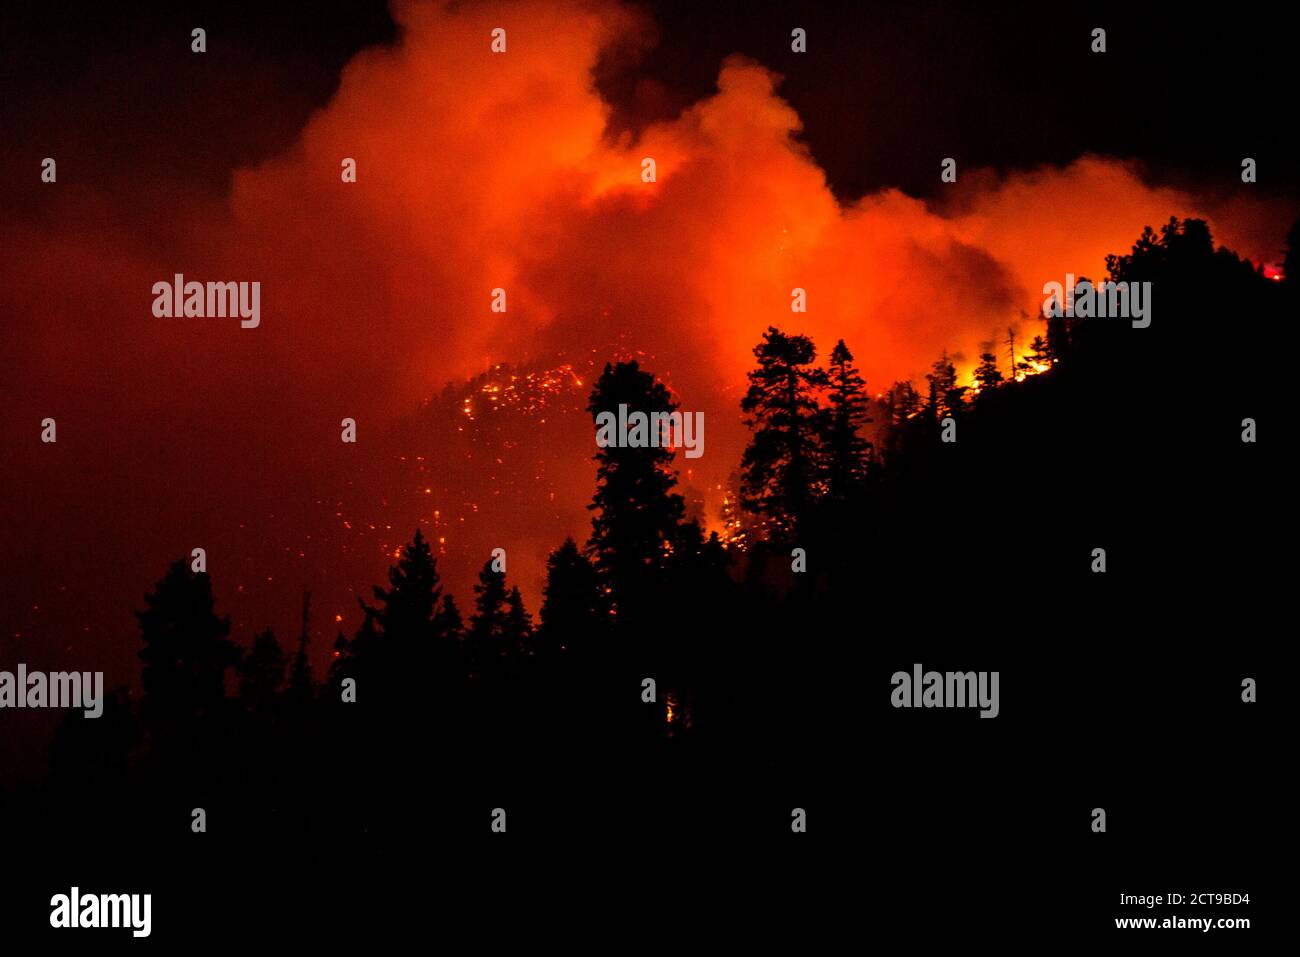 Los Angeles, California, USA. 21st Sep, 2020. The Bobcat Fire burns in the Angeles National Forest in Los Angeles, Monday, Sept. 21, 2020. Credit: Ringo Chiu/ZUMA Wire/Alamy Live News Stock Photo